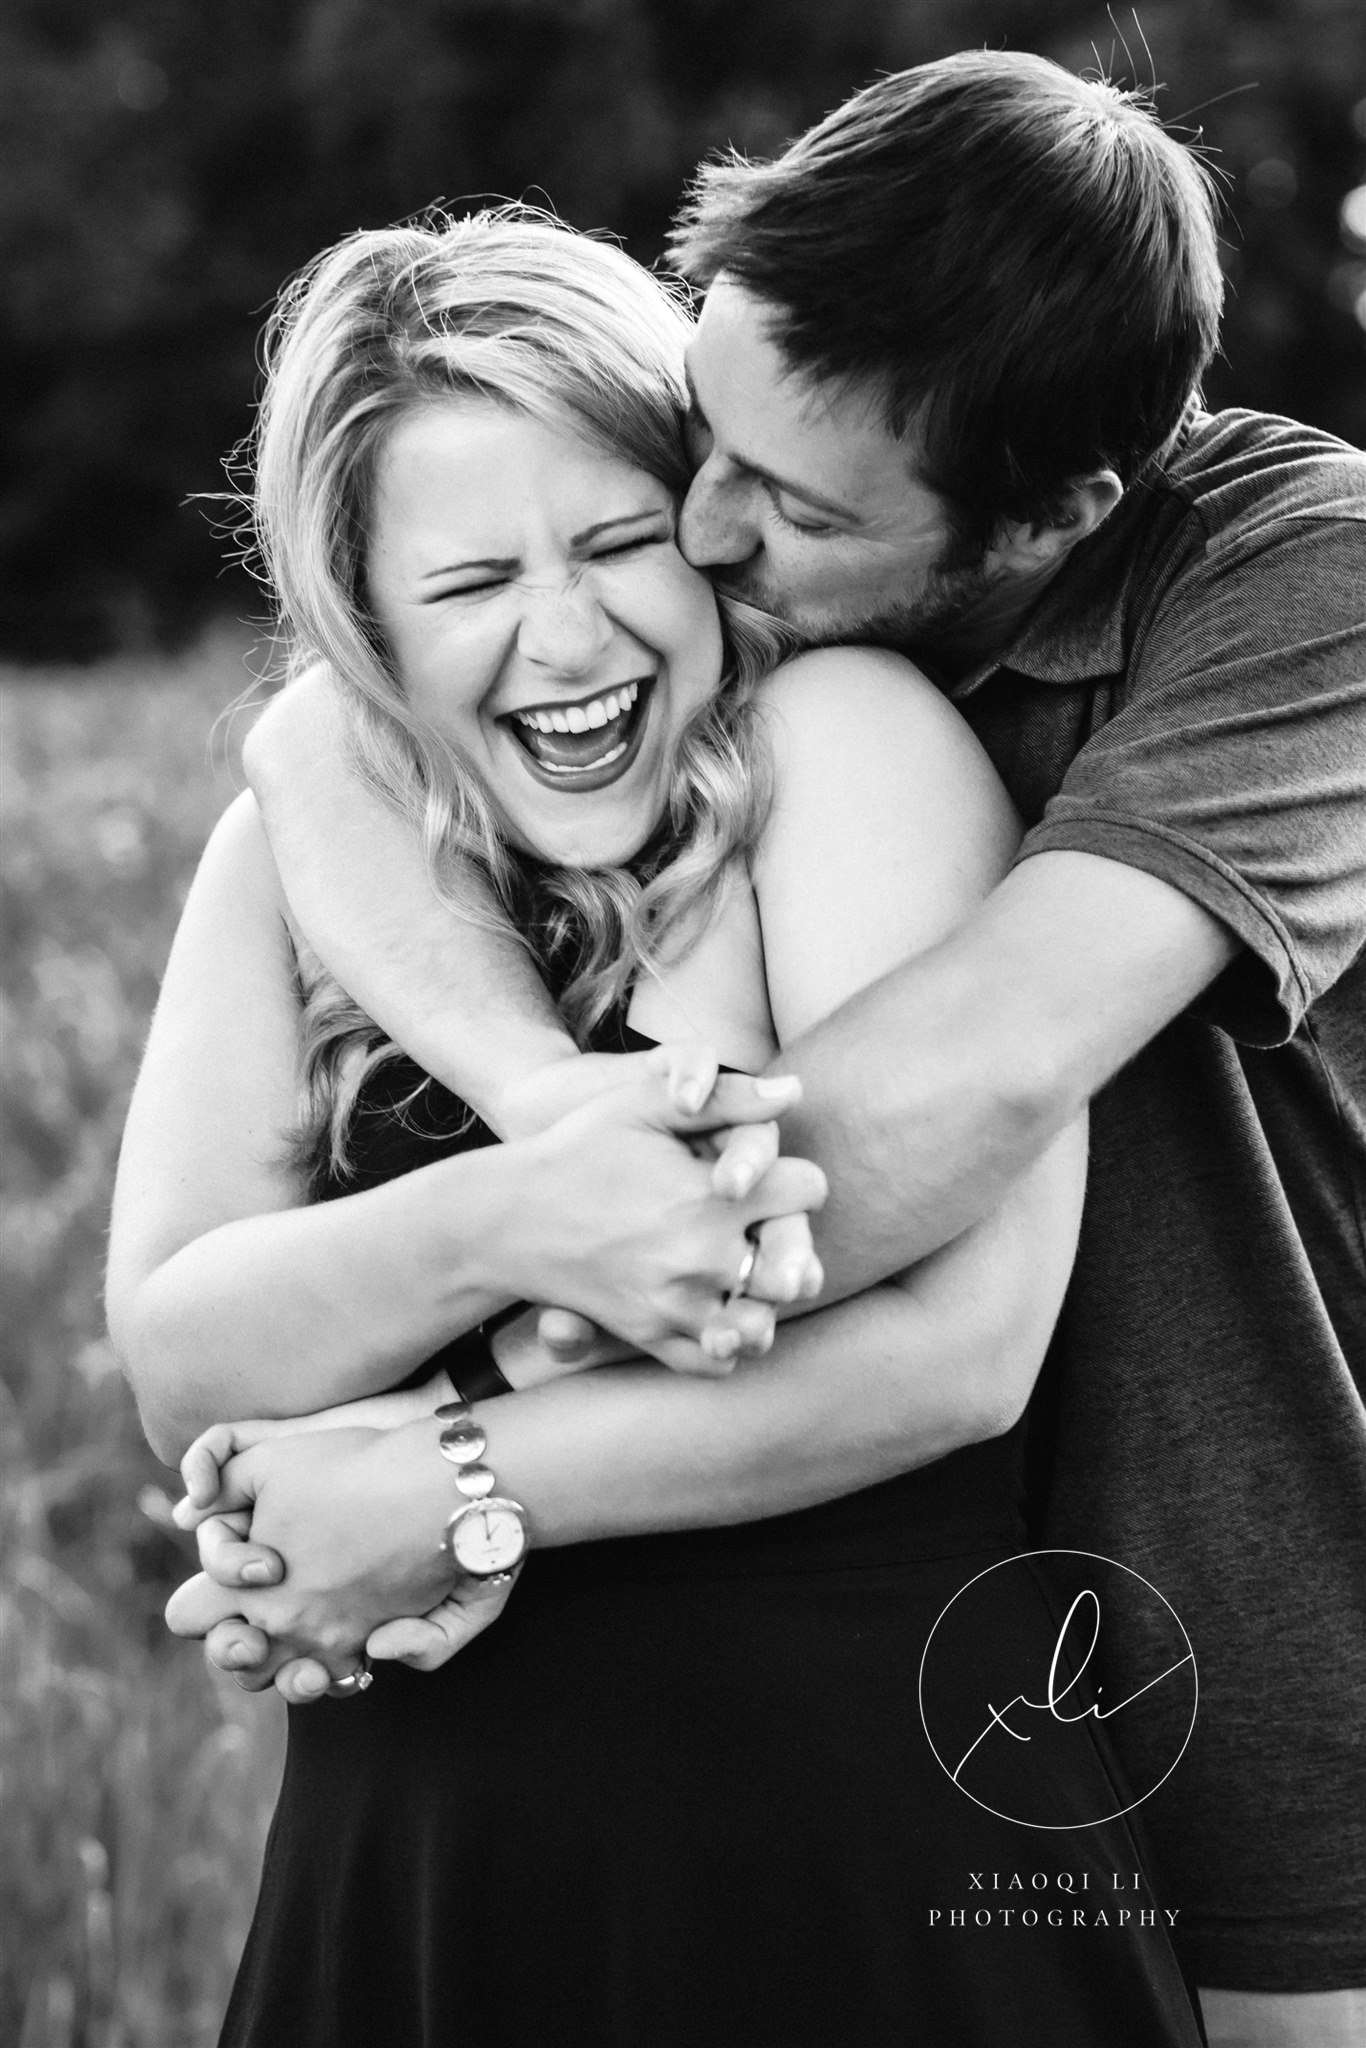 man hugging woman and laughing during outdoor session